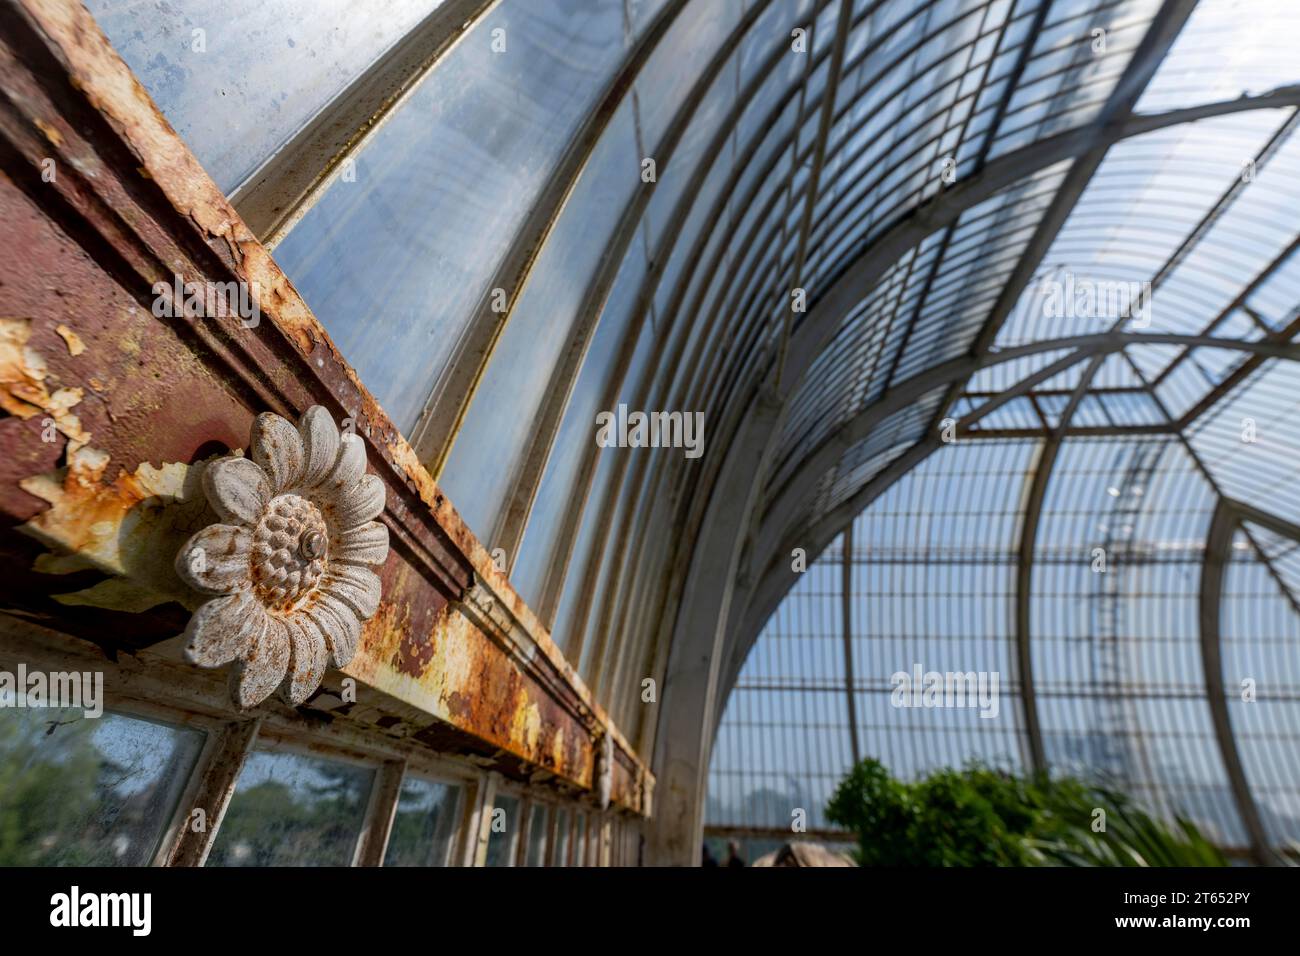 Floral decorative element, Palm House, oldest Victorian greenhouse in the world, Royal Botanic Gardens, Kew, London, England, Great Britain Stock Photo